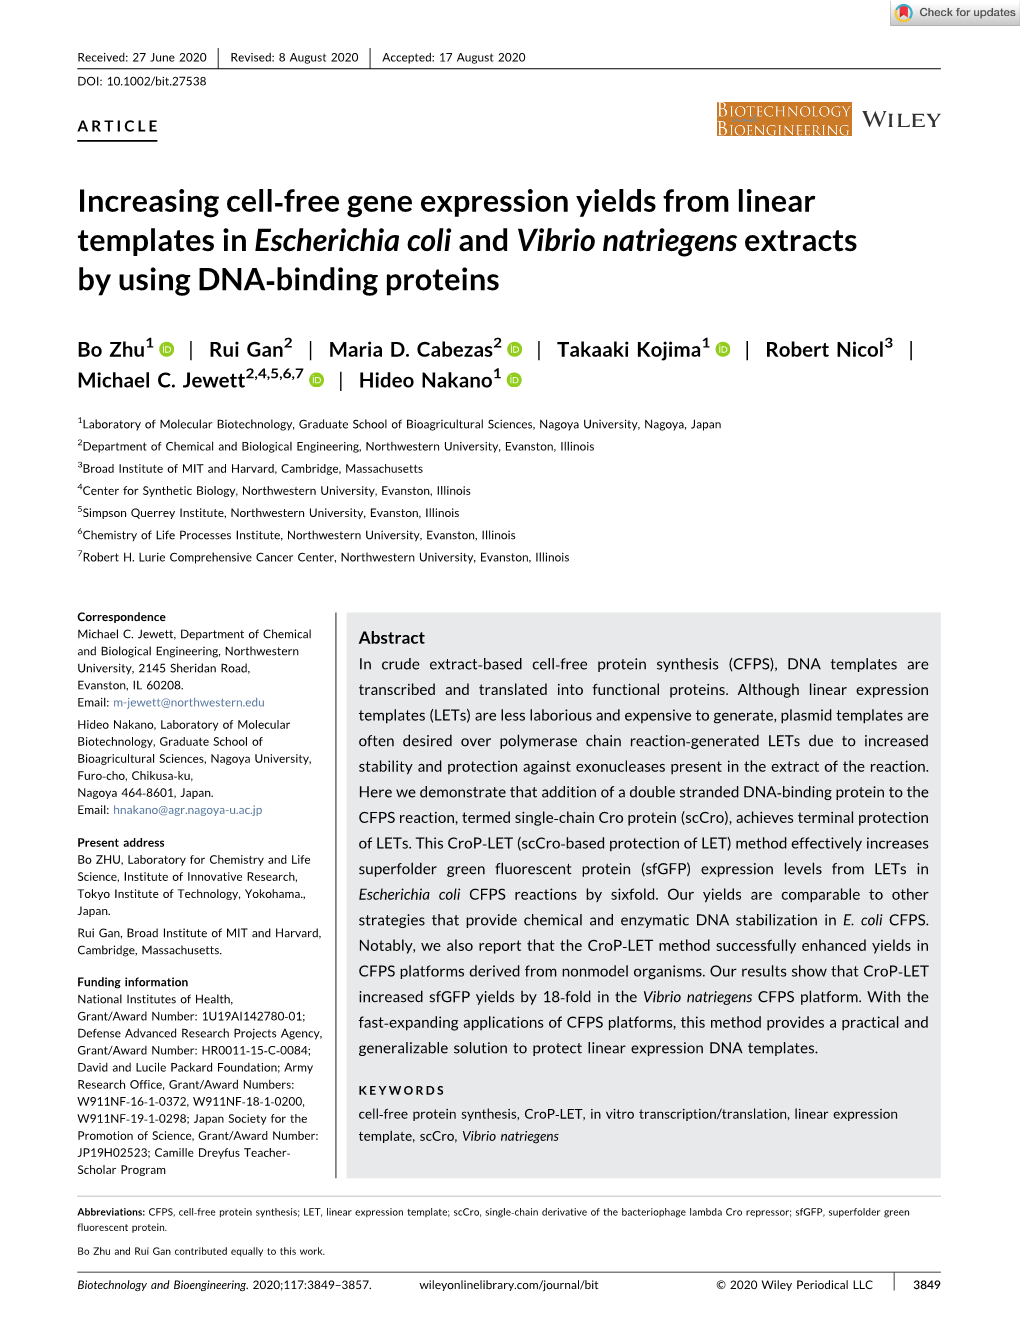 Increasing Cell‐Free Gene Expression Yields from Linear Templates in Escherichia Coli and Vibrio Natriegens Extracts by Using DNA‐Binding Proteins